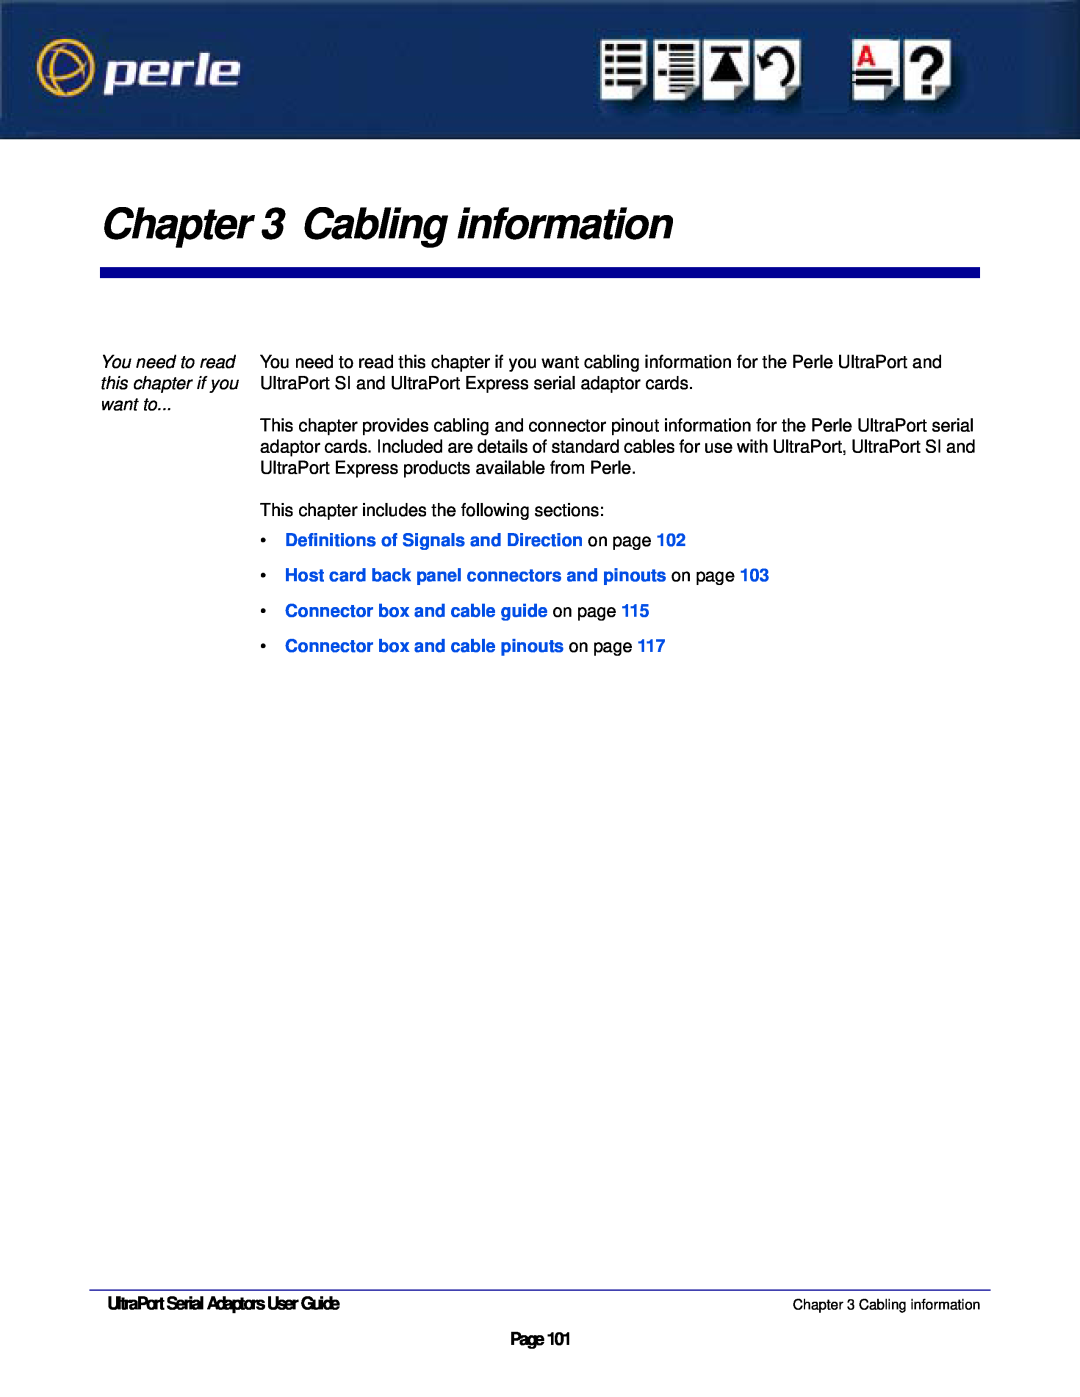 Perle Systems 5500152-23 manual Cabling information, You need to read this chapter if you want to, Page101 